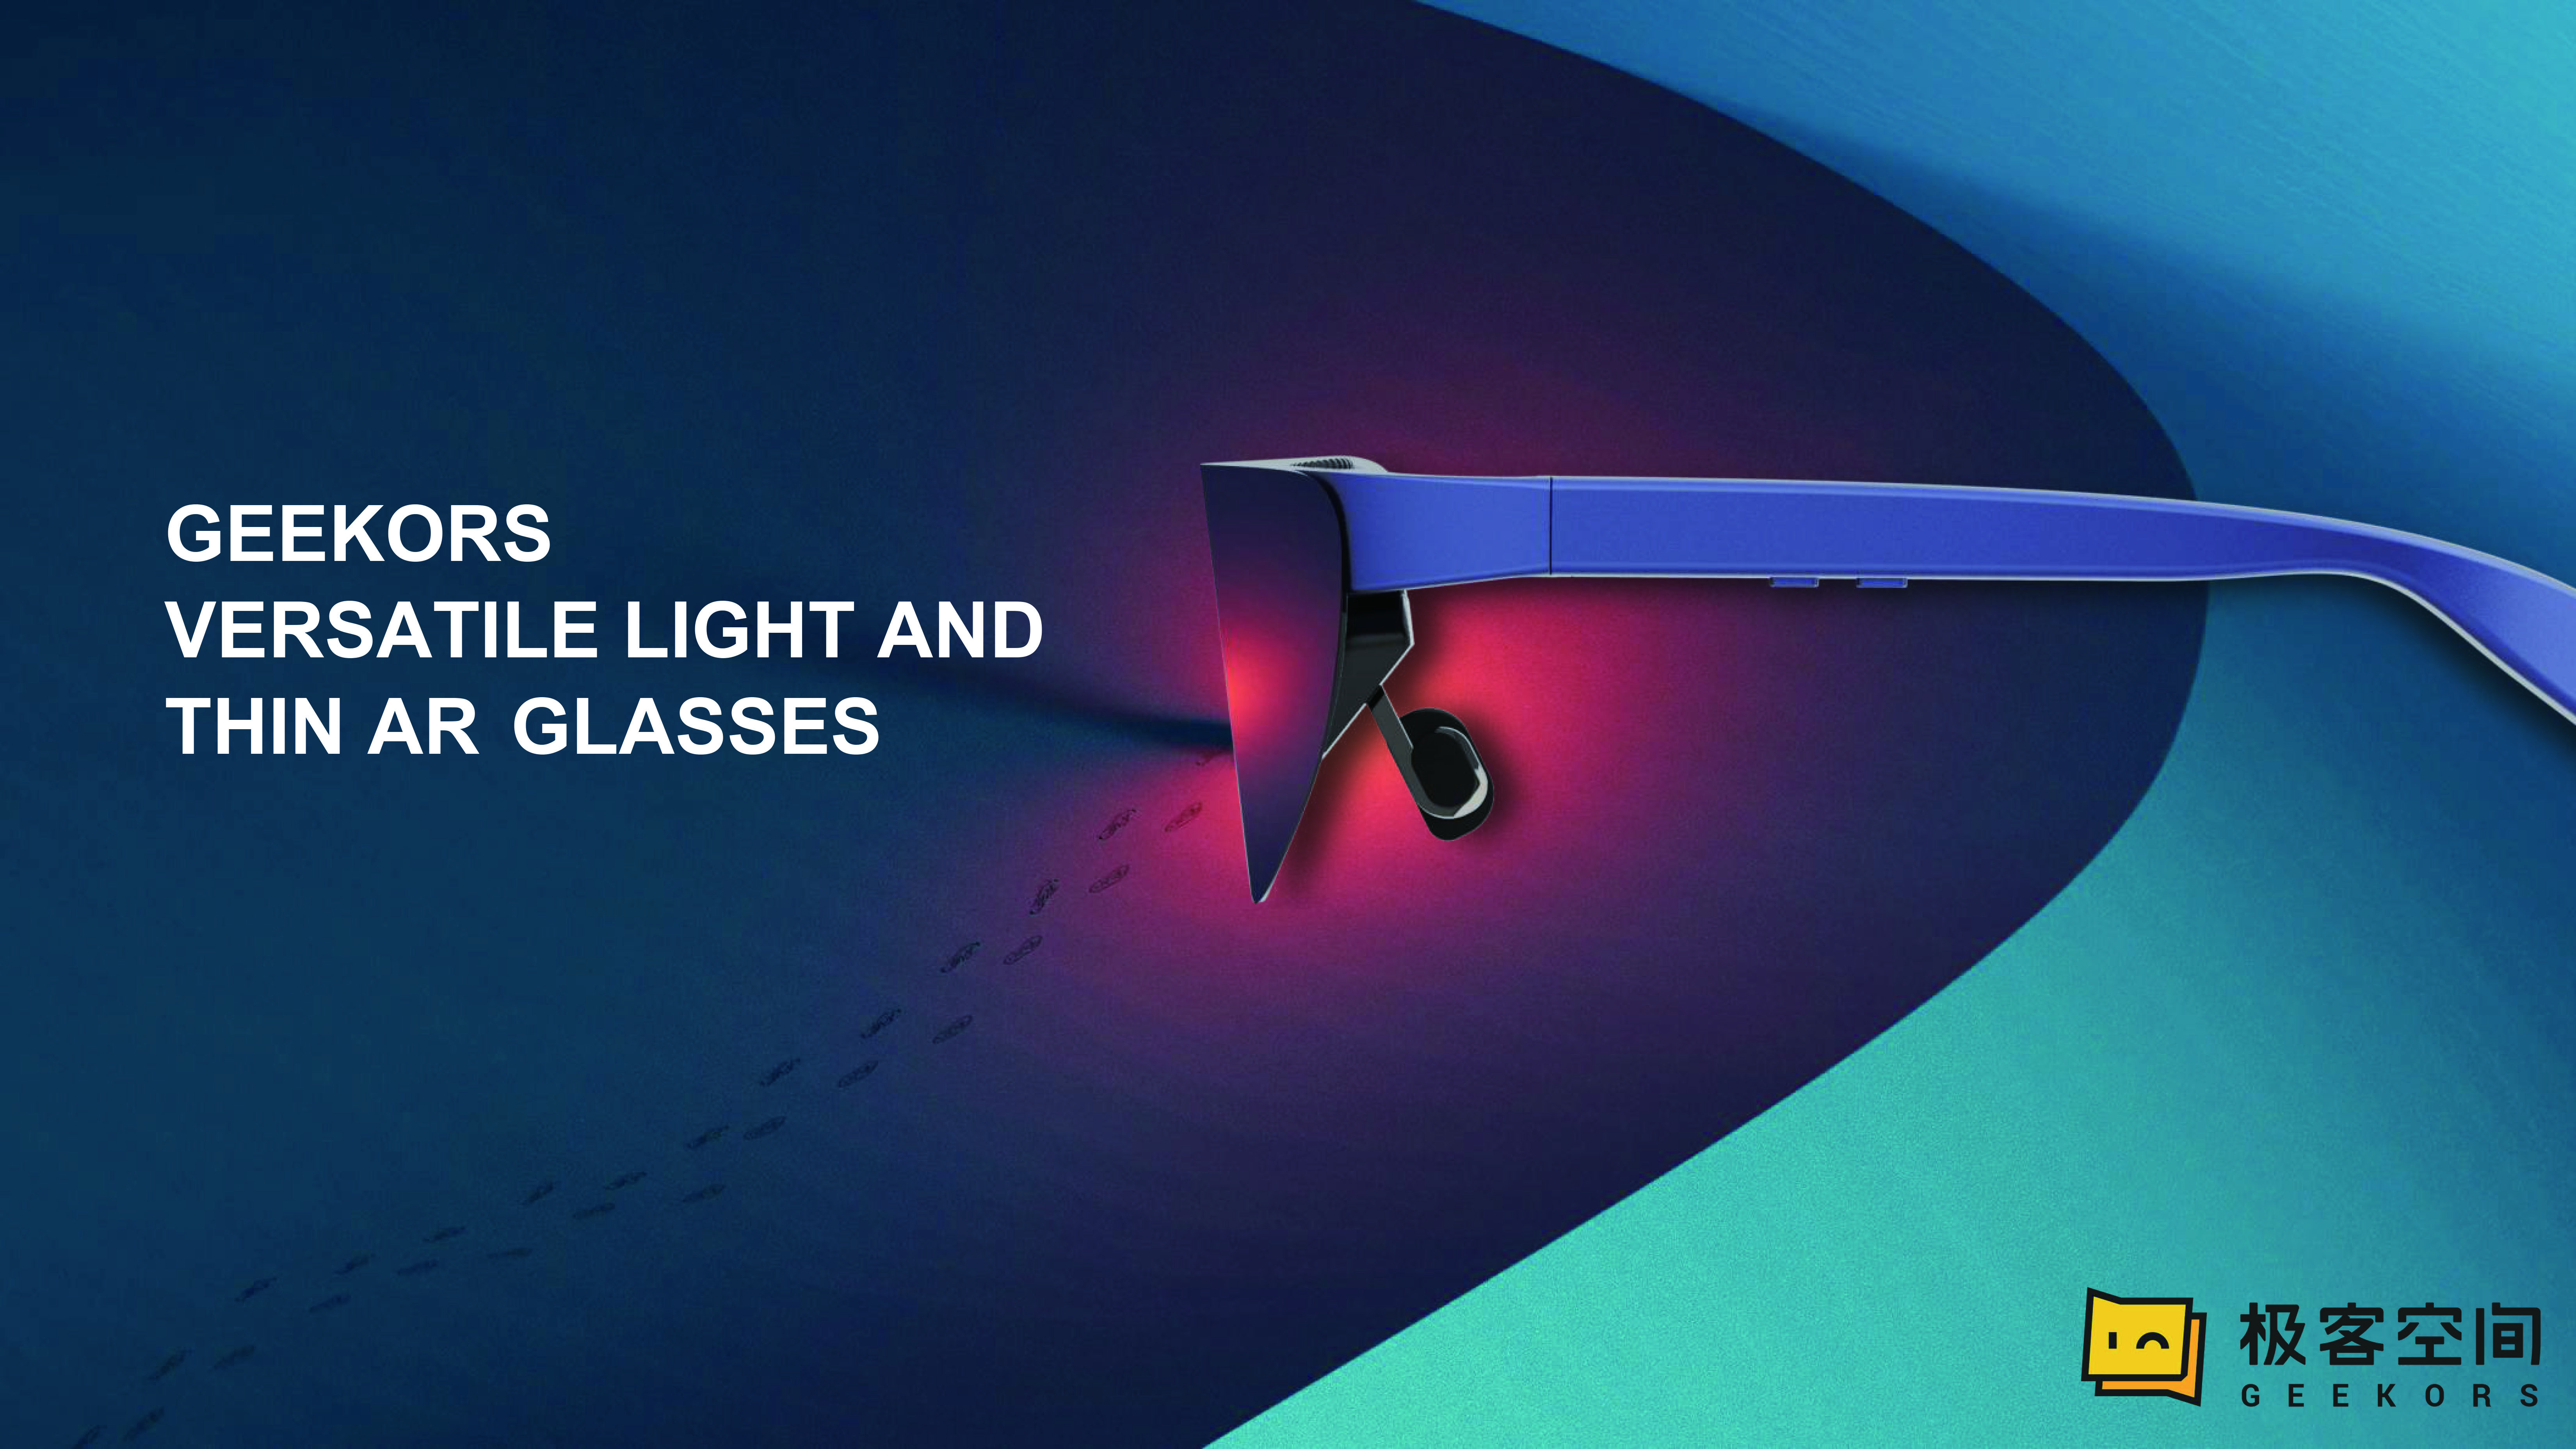 THE FIRST VERSATILE LIGHT AND THIN AR GLASSES - Professional cinema-level 220-inch private giant-screen AR glasses, you can enjoy a visual feast that is astonishing!